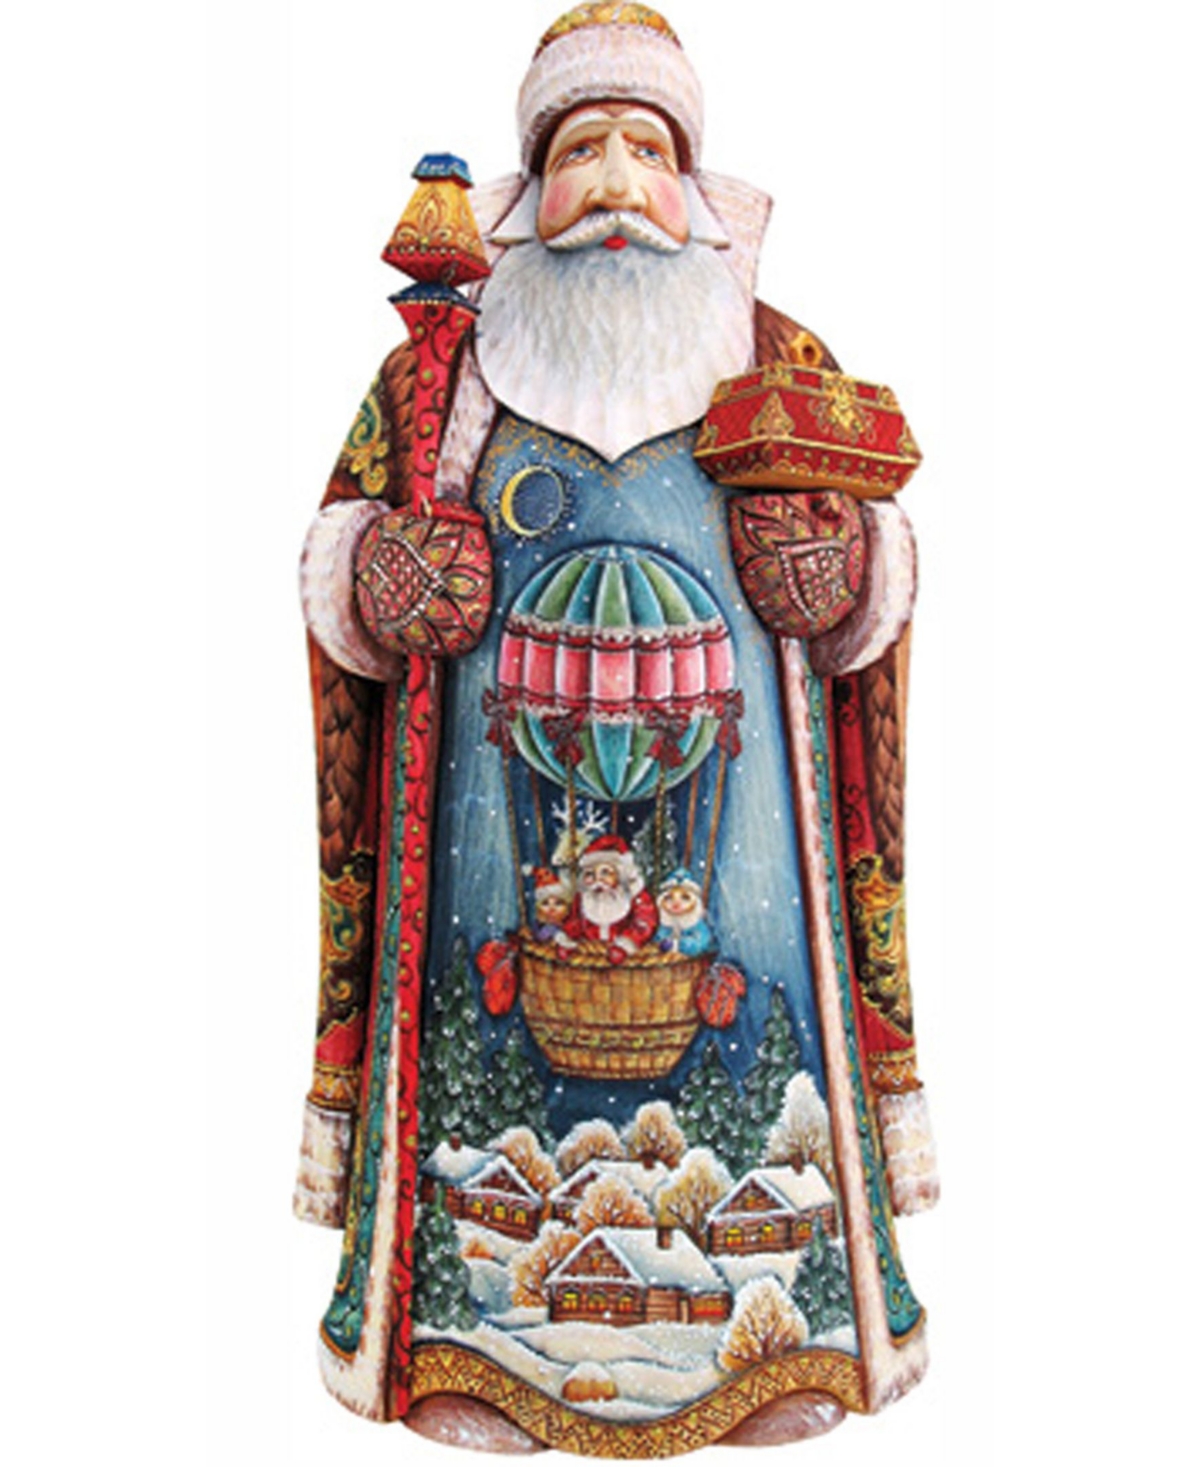 Woodcarved and Hand Painted Balloon Ride Santa Figurine - Multi